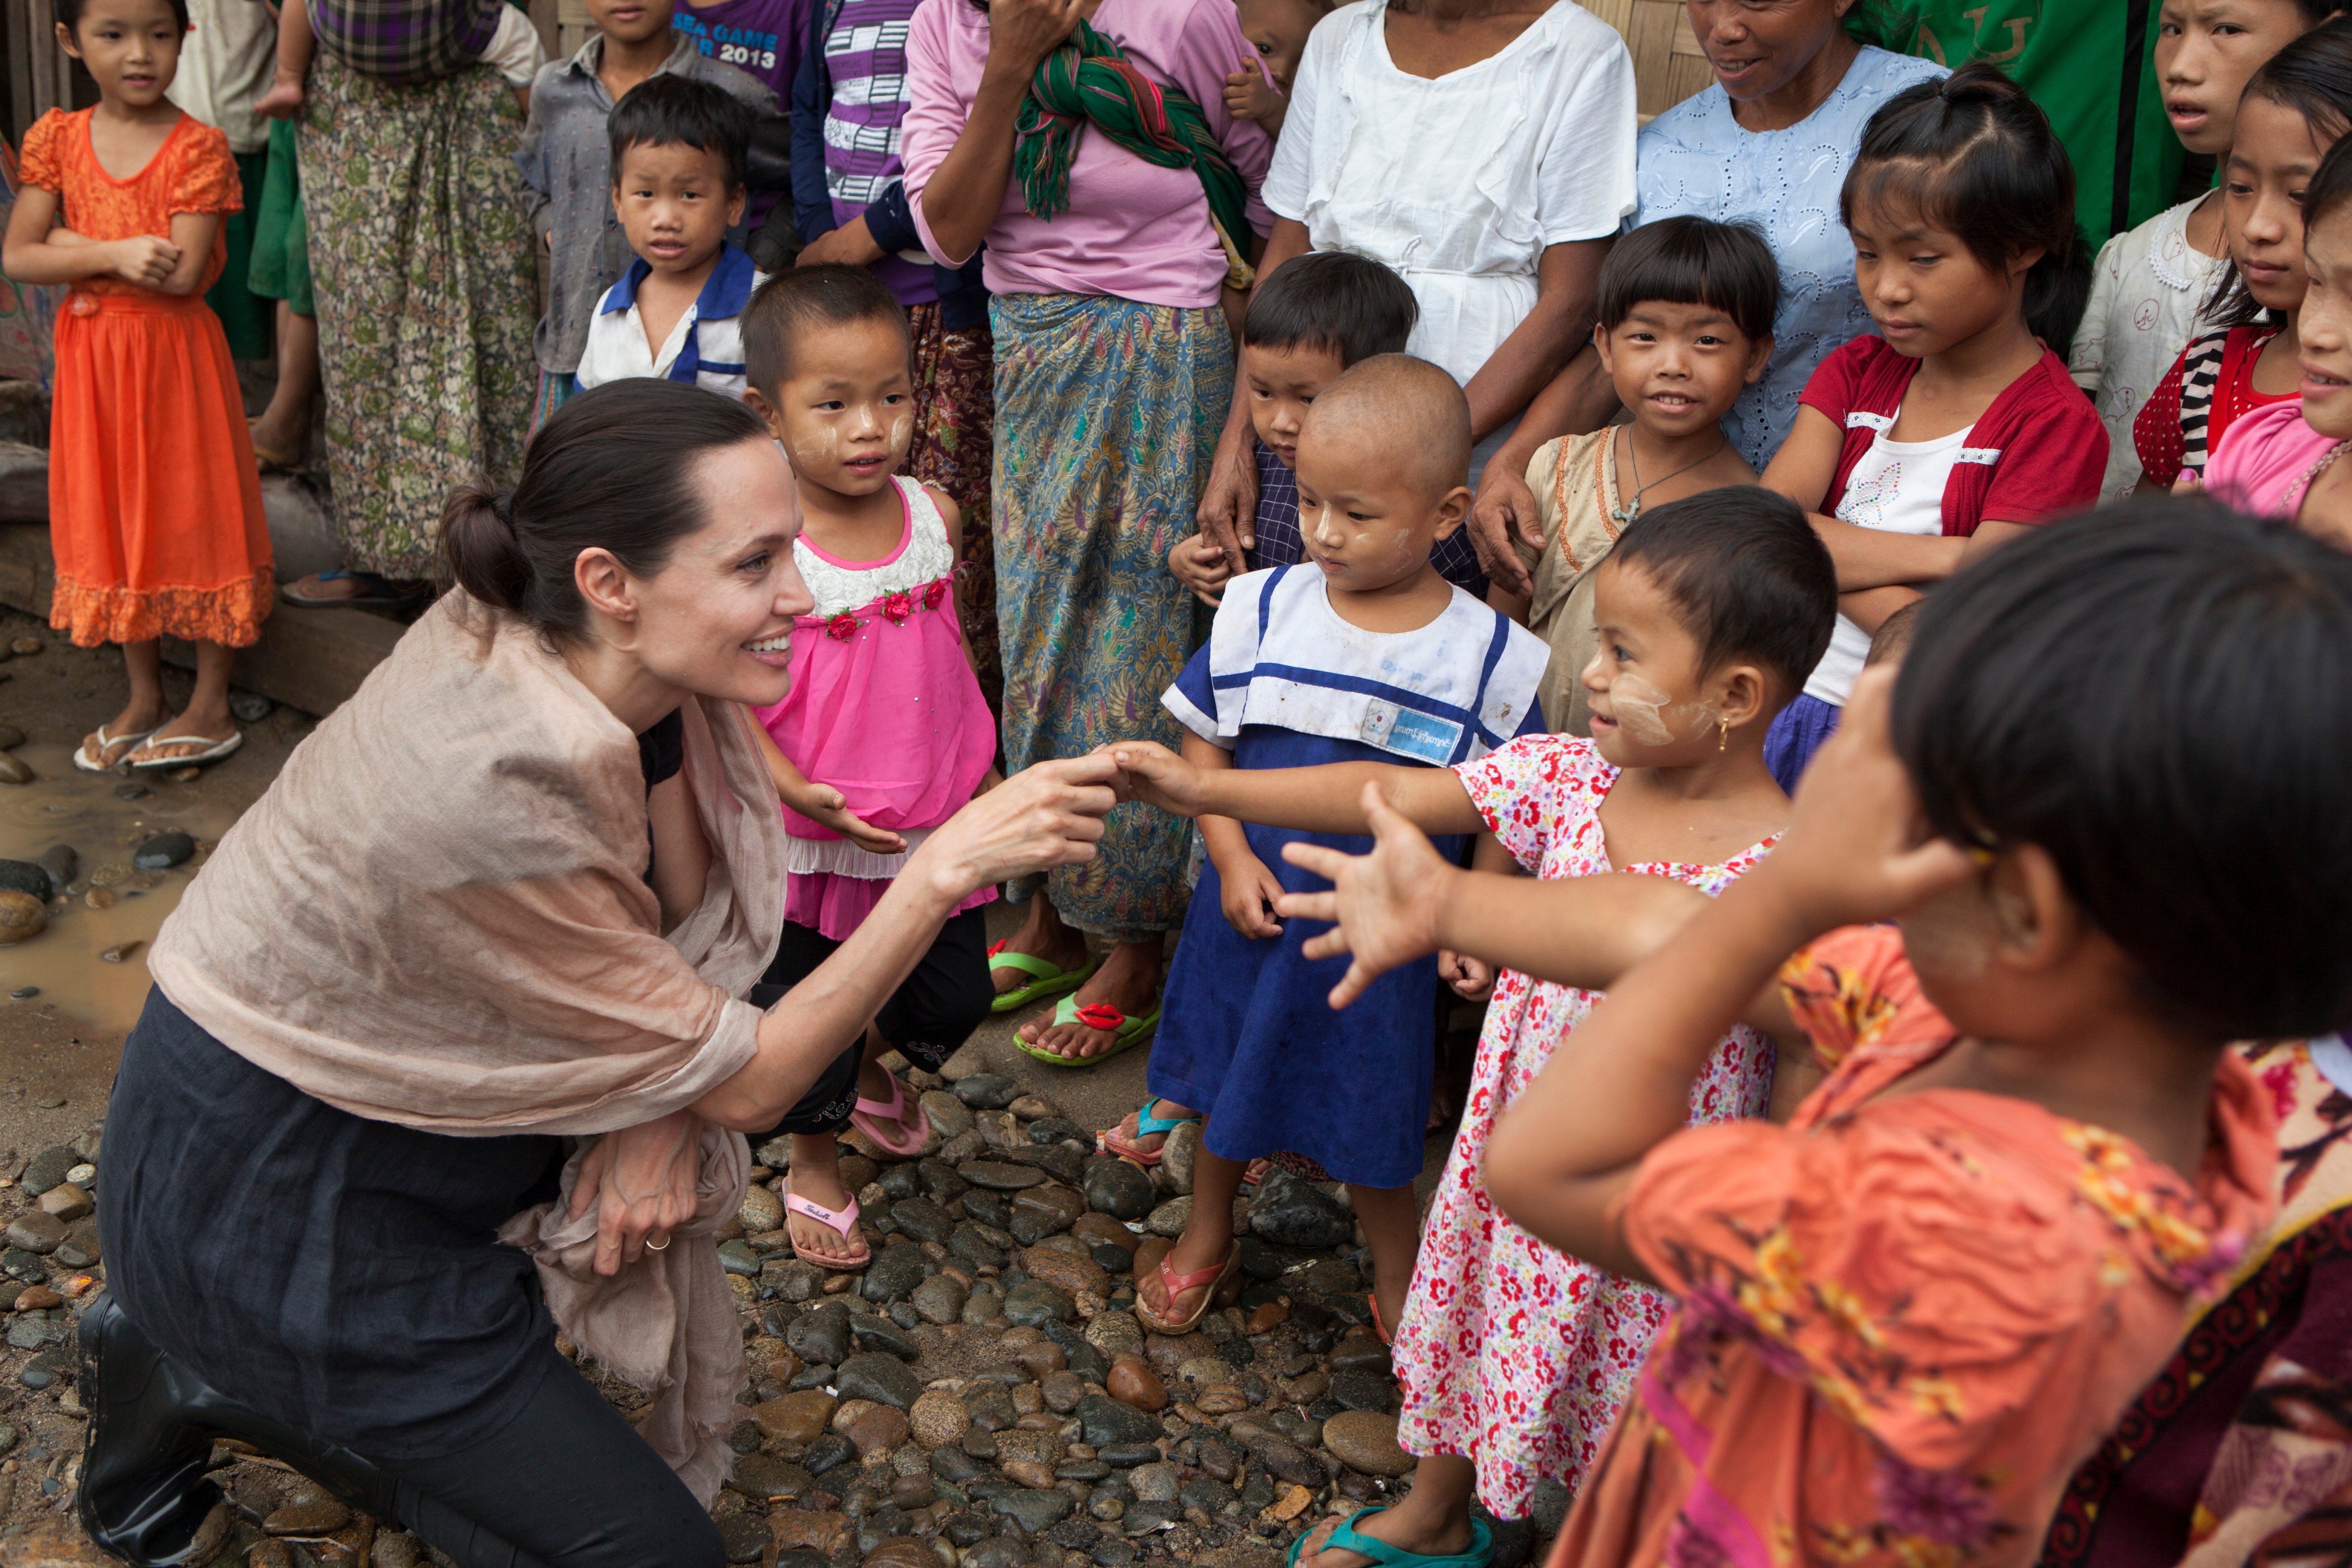 In this handout photo provided by the Maddox Jolie-Pitt Foundation, actress and activist Angelina Jolie Pitt meets children during a visit to Ja Mai Kaung Baptist refugee camp on July 30, 2015 in Myitkyina, Burna.